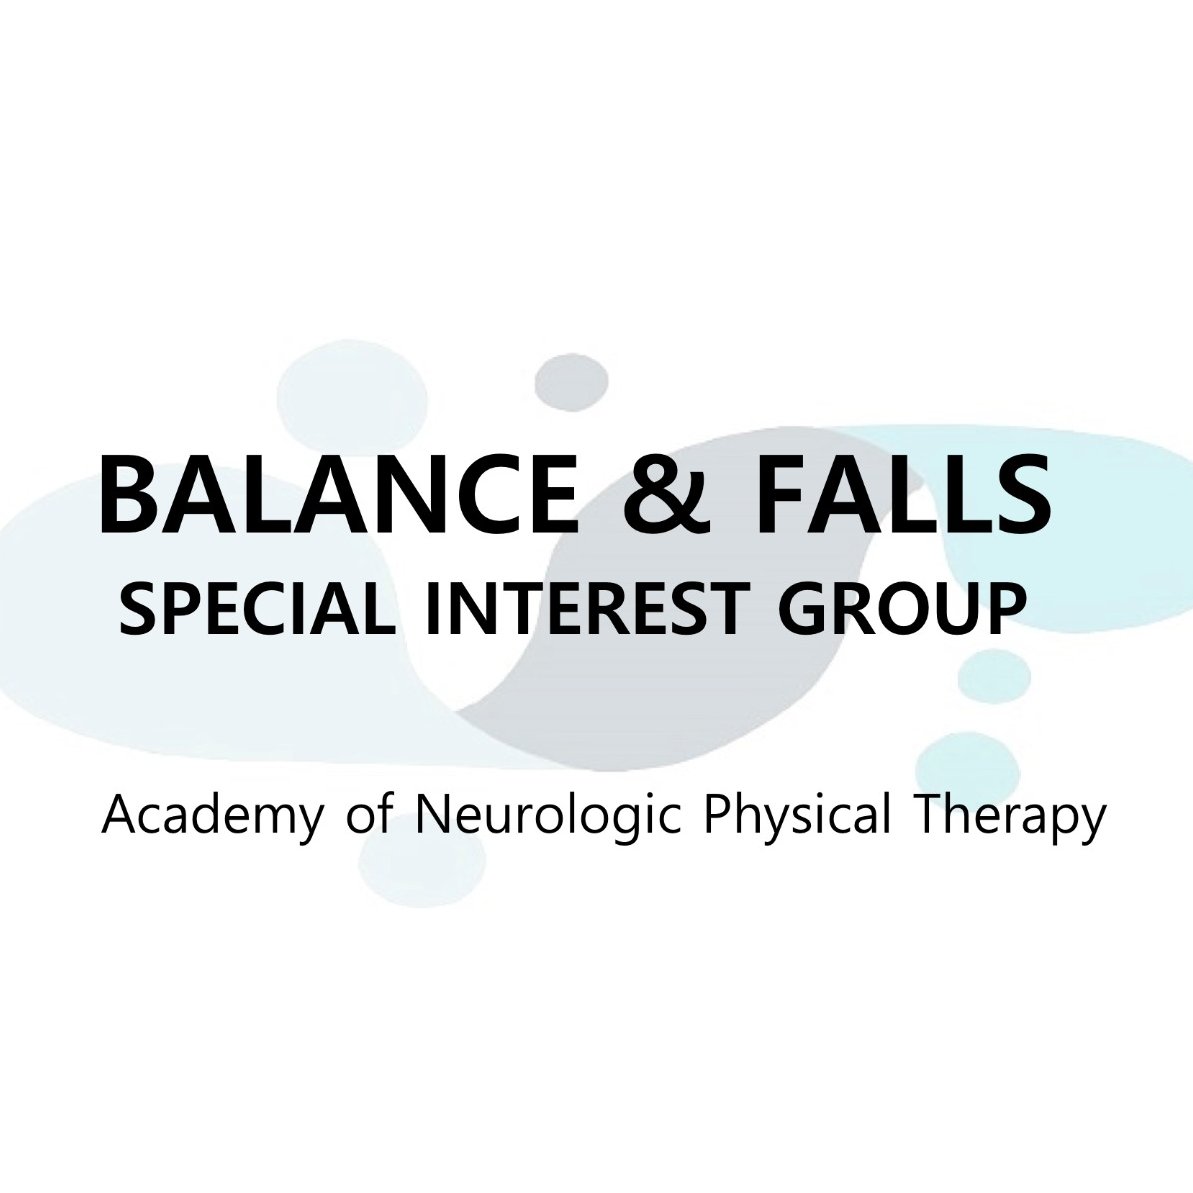 Raising awareness of the impact of neurologic impairments on balance dysfunction, falls and fall prevention